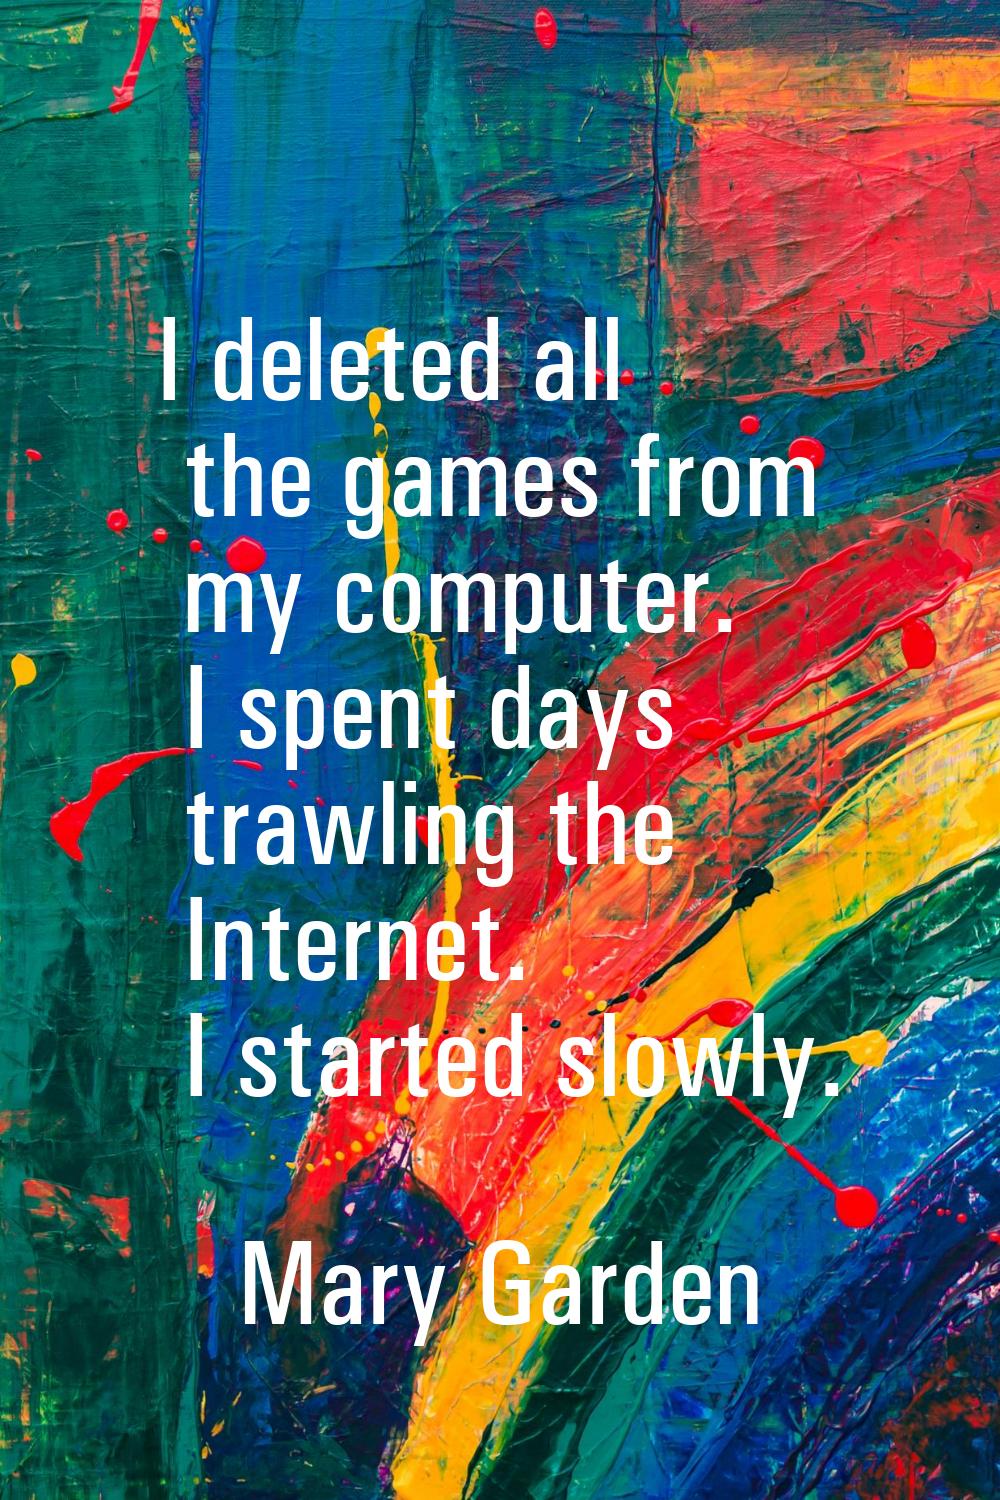 I deleted all the games from my computer. I spent days trawling the Internet. I started slowly.